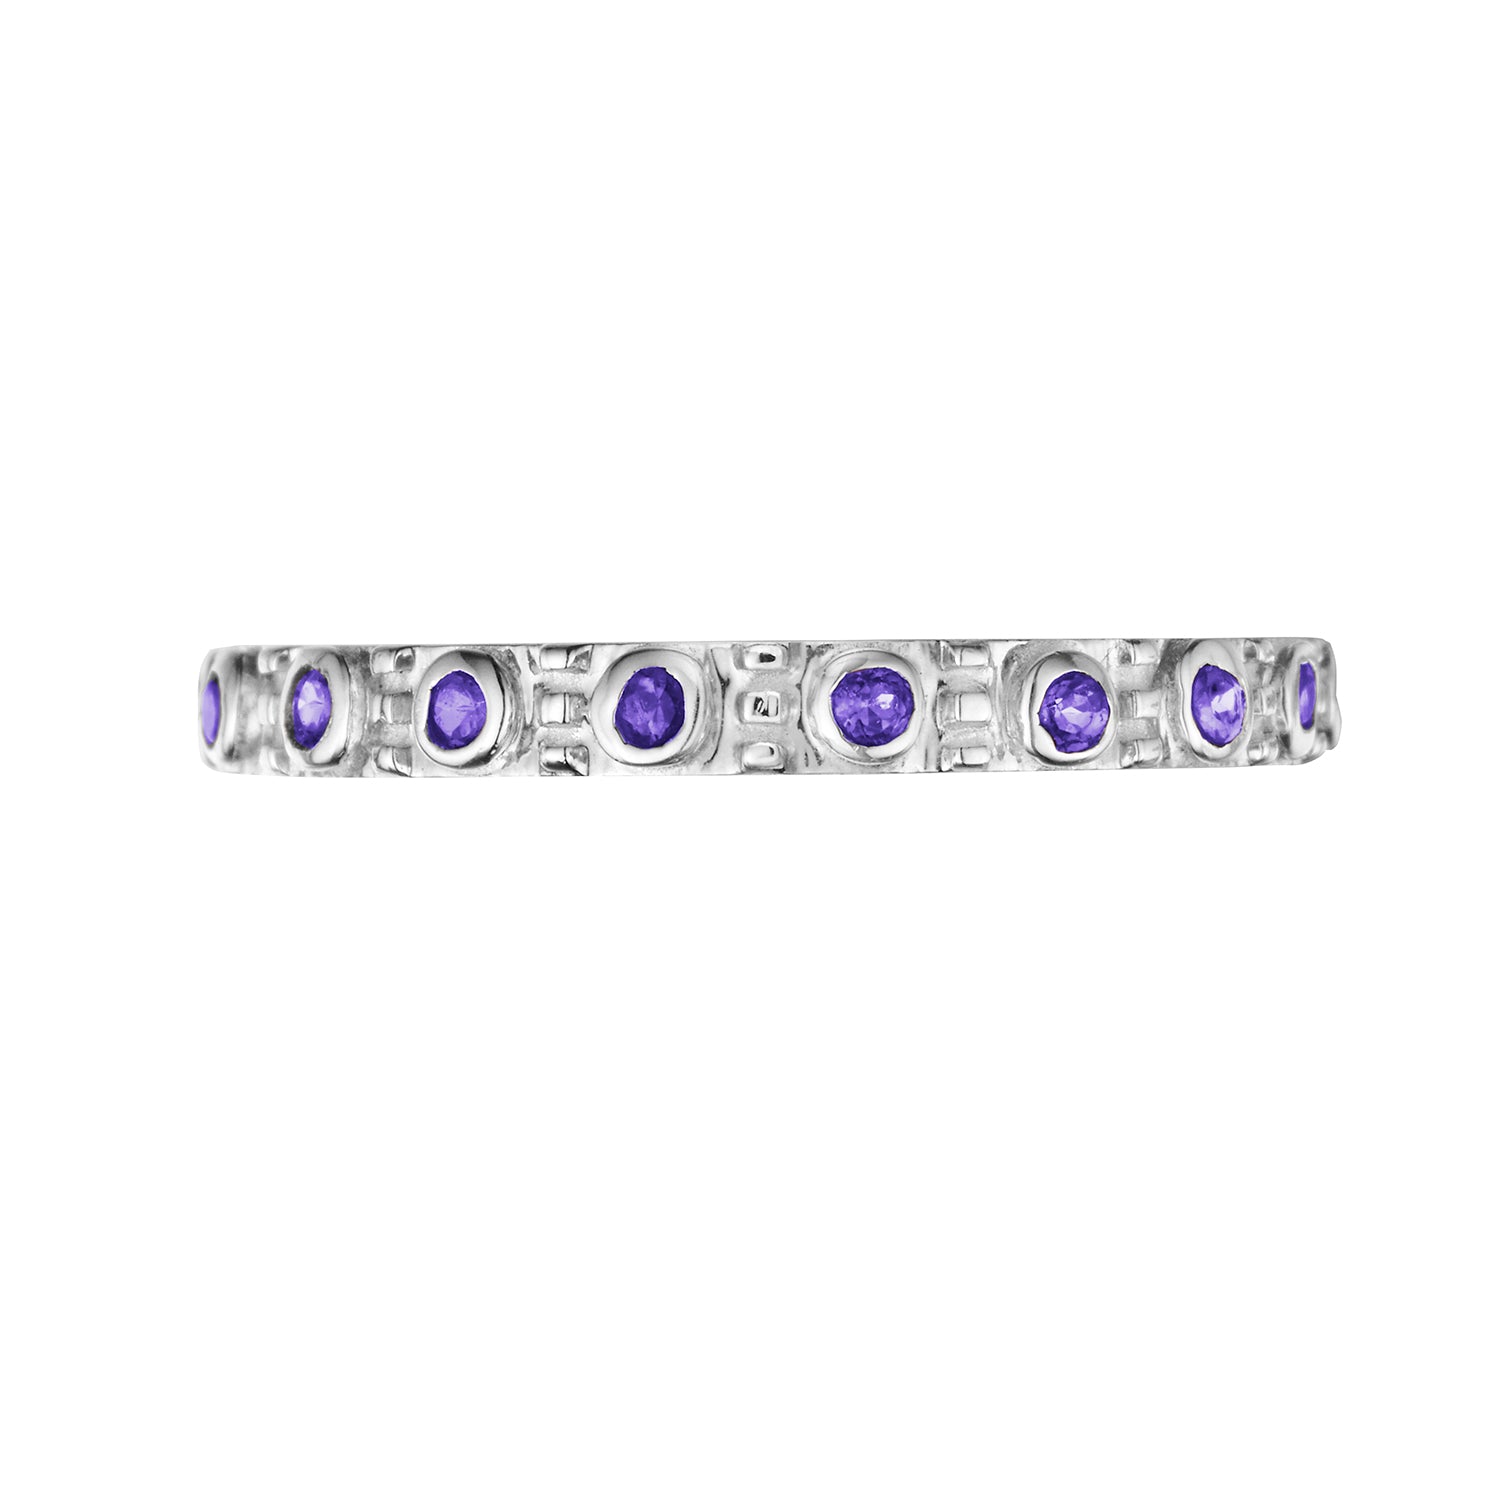 Polished Silver Eternity Stacking Birthstone Rings - September / Iolite